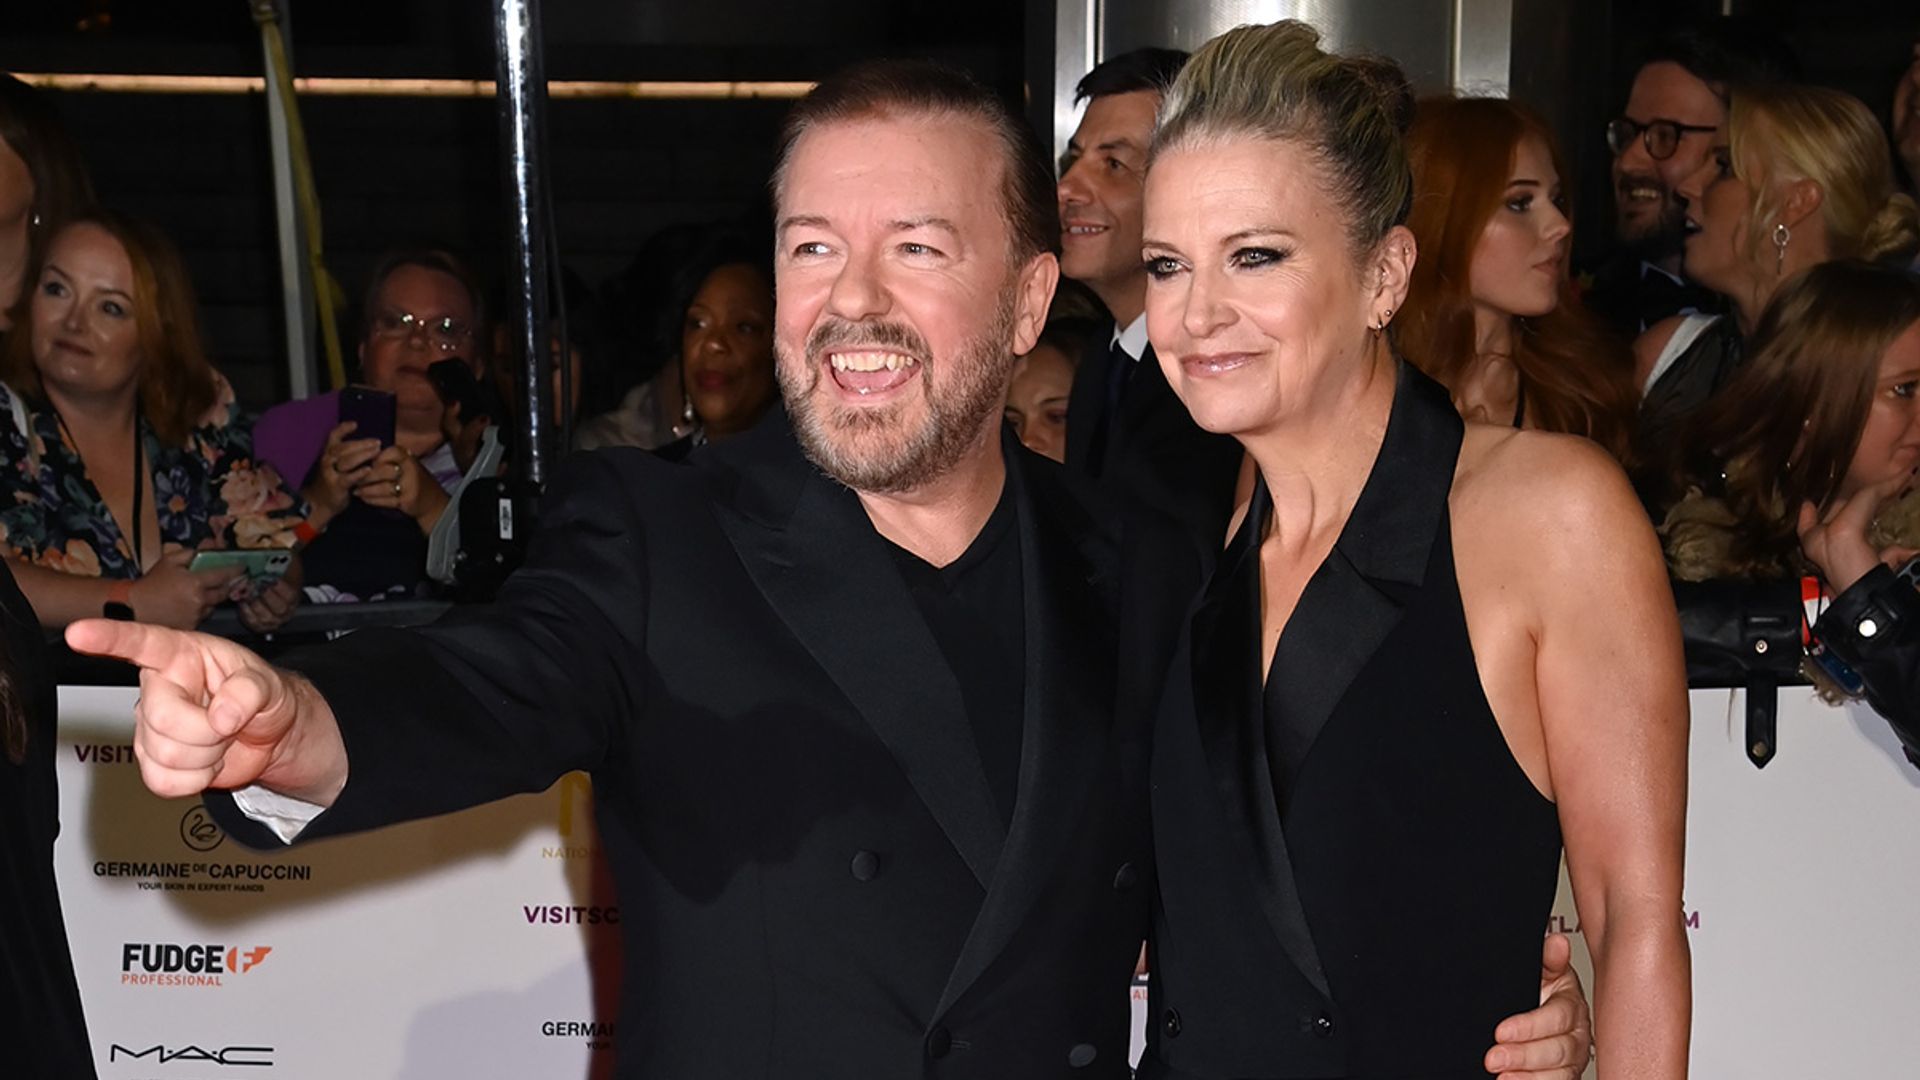 Ricky Gervais reveals new project during NTAs appearance with partner Jane Fallon - and we can't wait